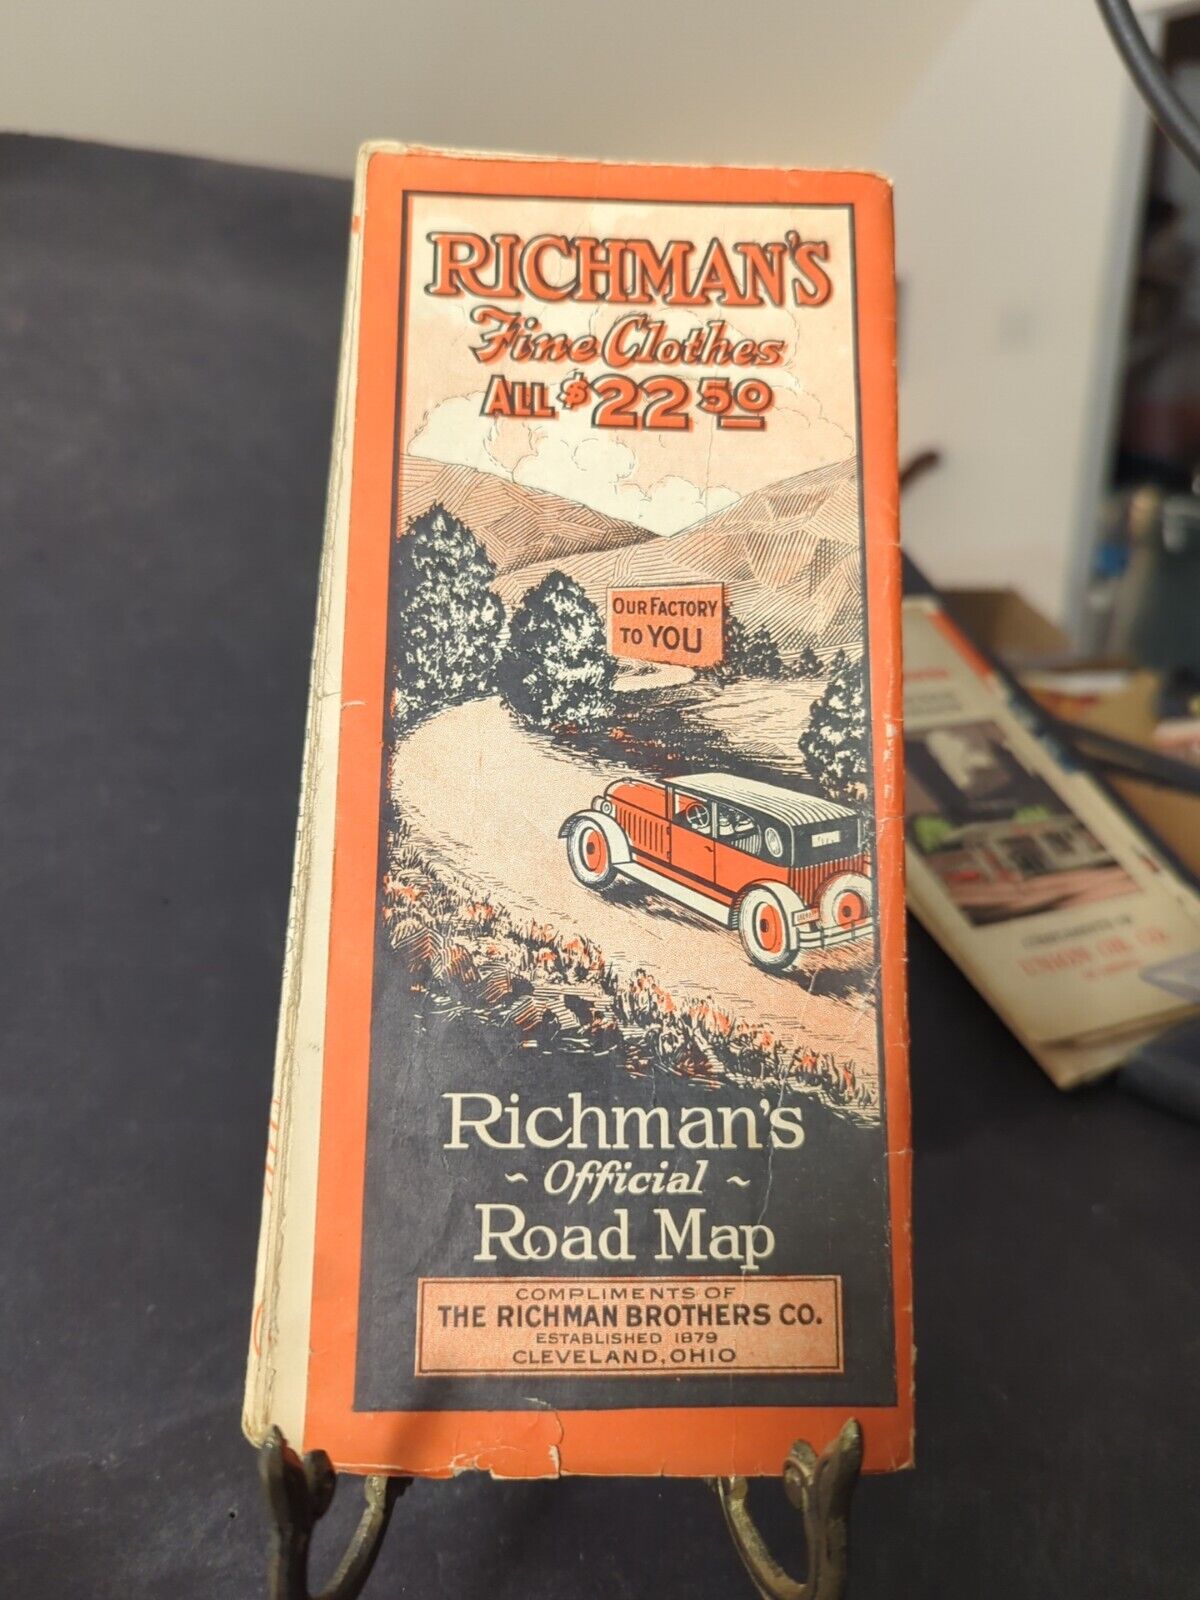 1920s Richman's Fine Clothes Road Map Advertising